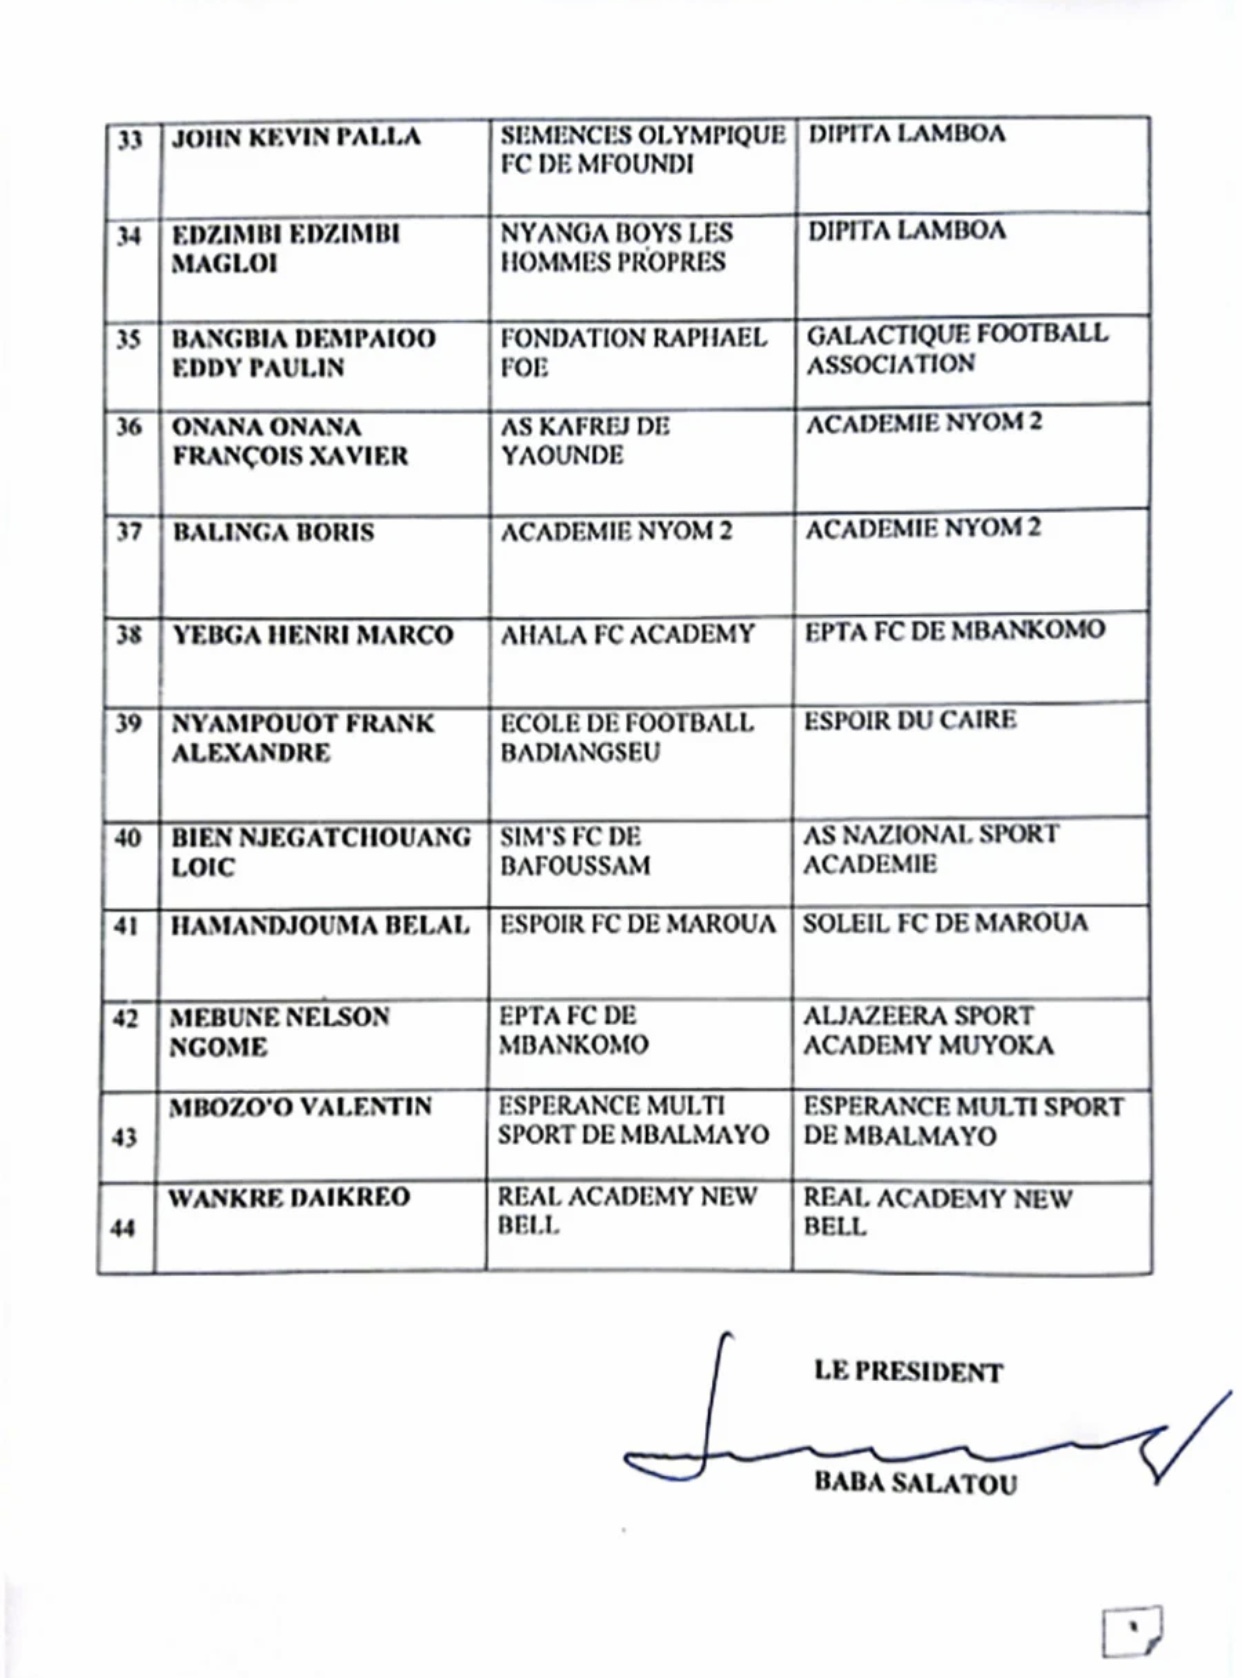 FECAFOOT ethics commission opens proceedings against some Cameroon league players for Age cheating, some Club presidents included.